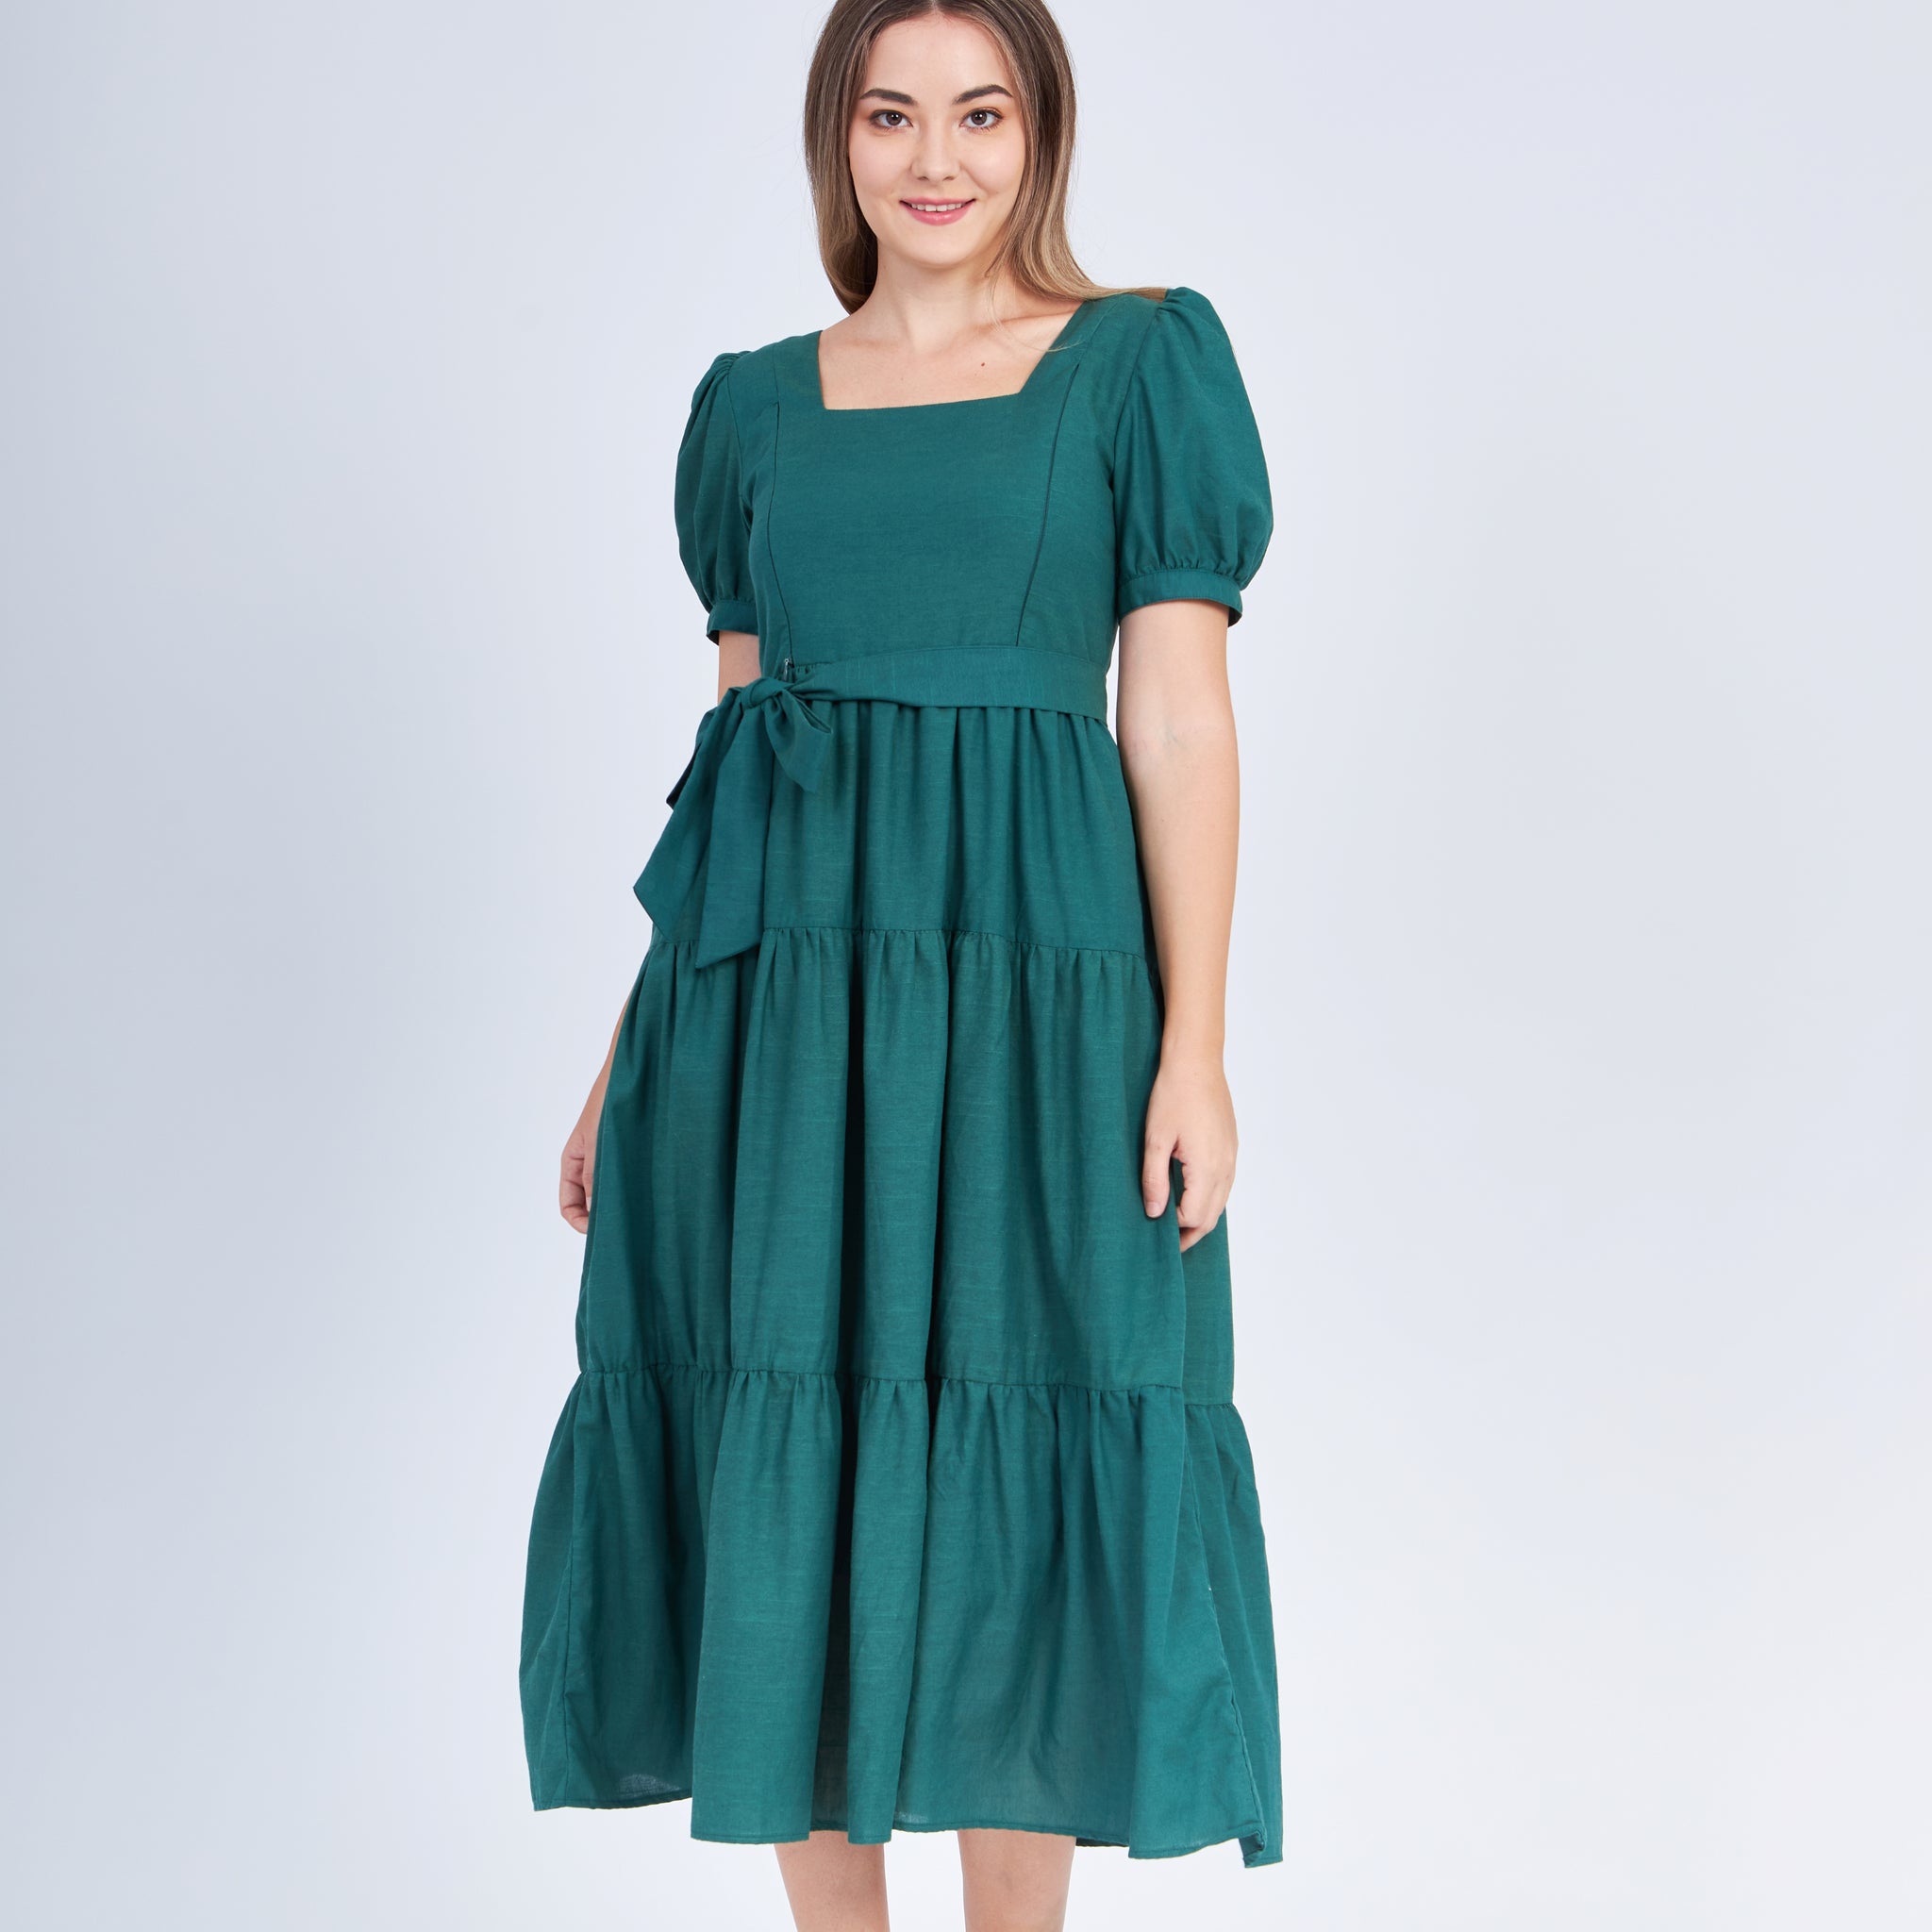 Versa Everywhere Dress with Nursing Zippers in Evergreen (Ready-to-ship)